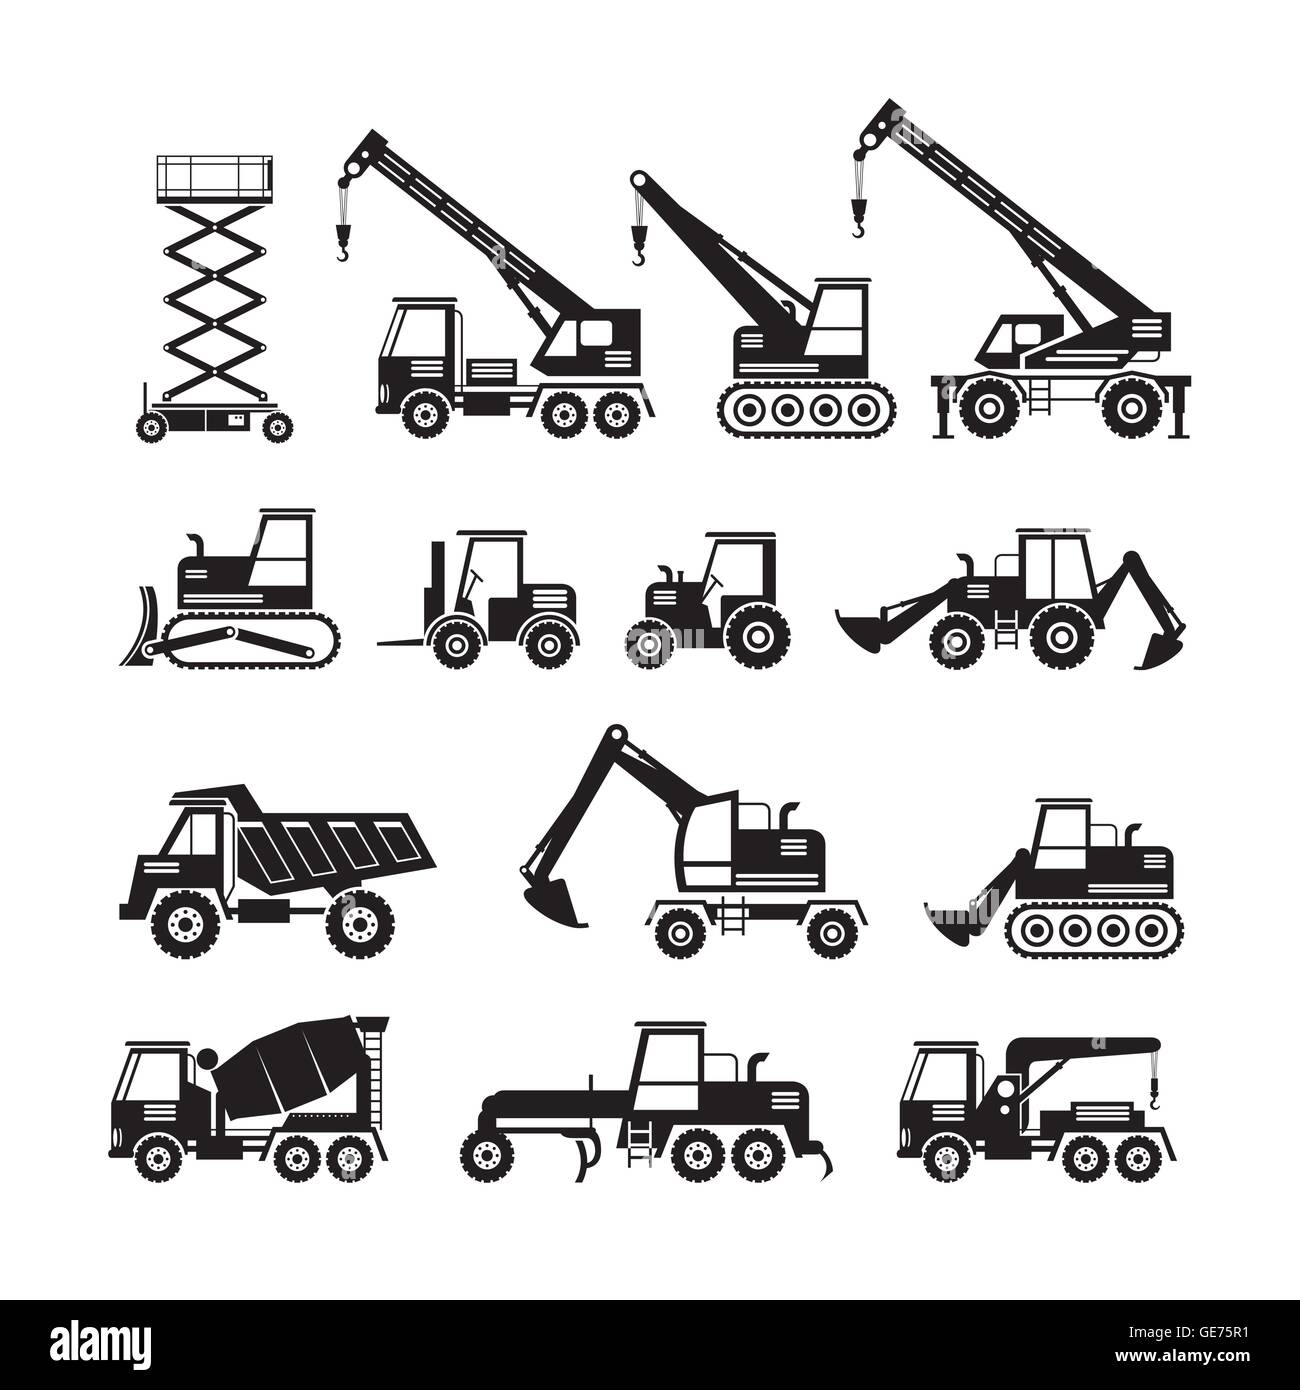 Construction Vehicles Objects Silhouette Set, Side View, Heavy Equipment, Machinery, Engineering Stock Vector